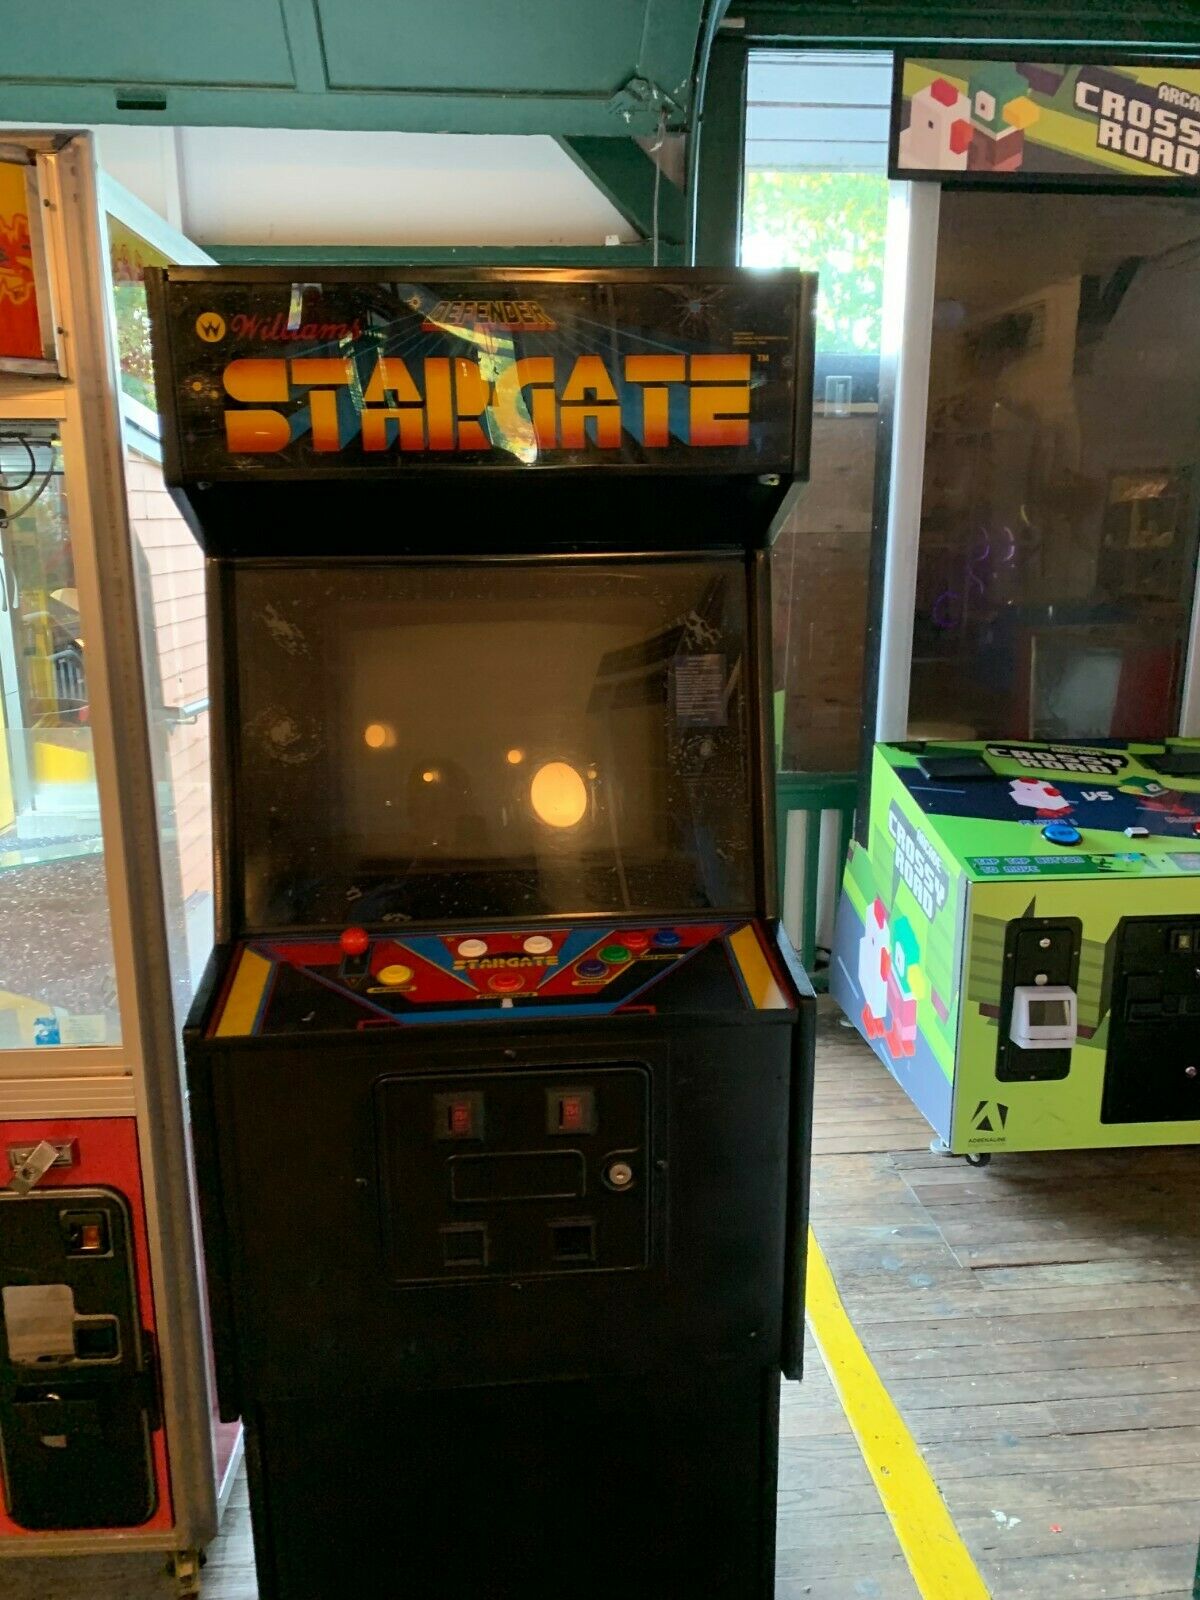 Stargate Commercial Arcade Video Game